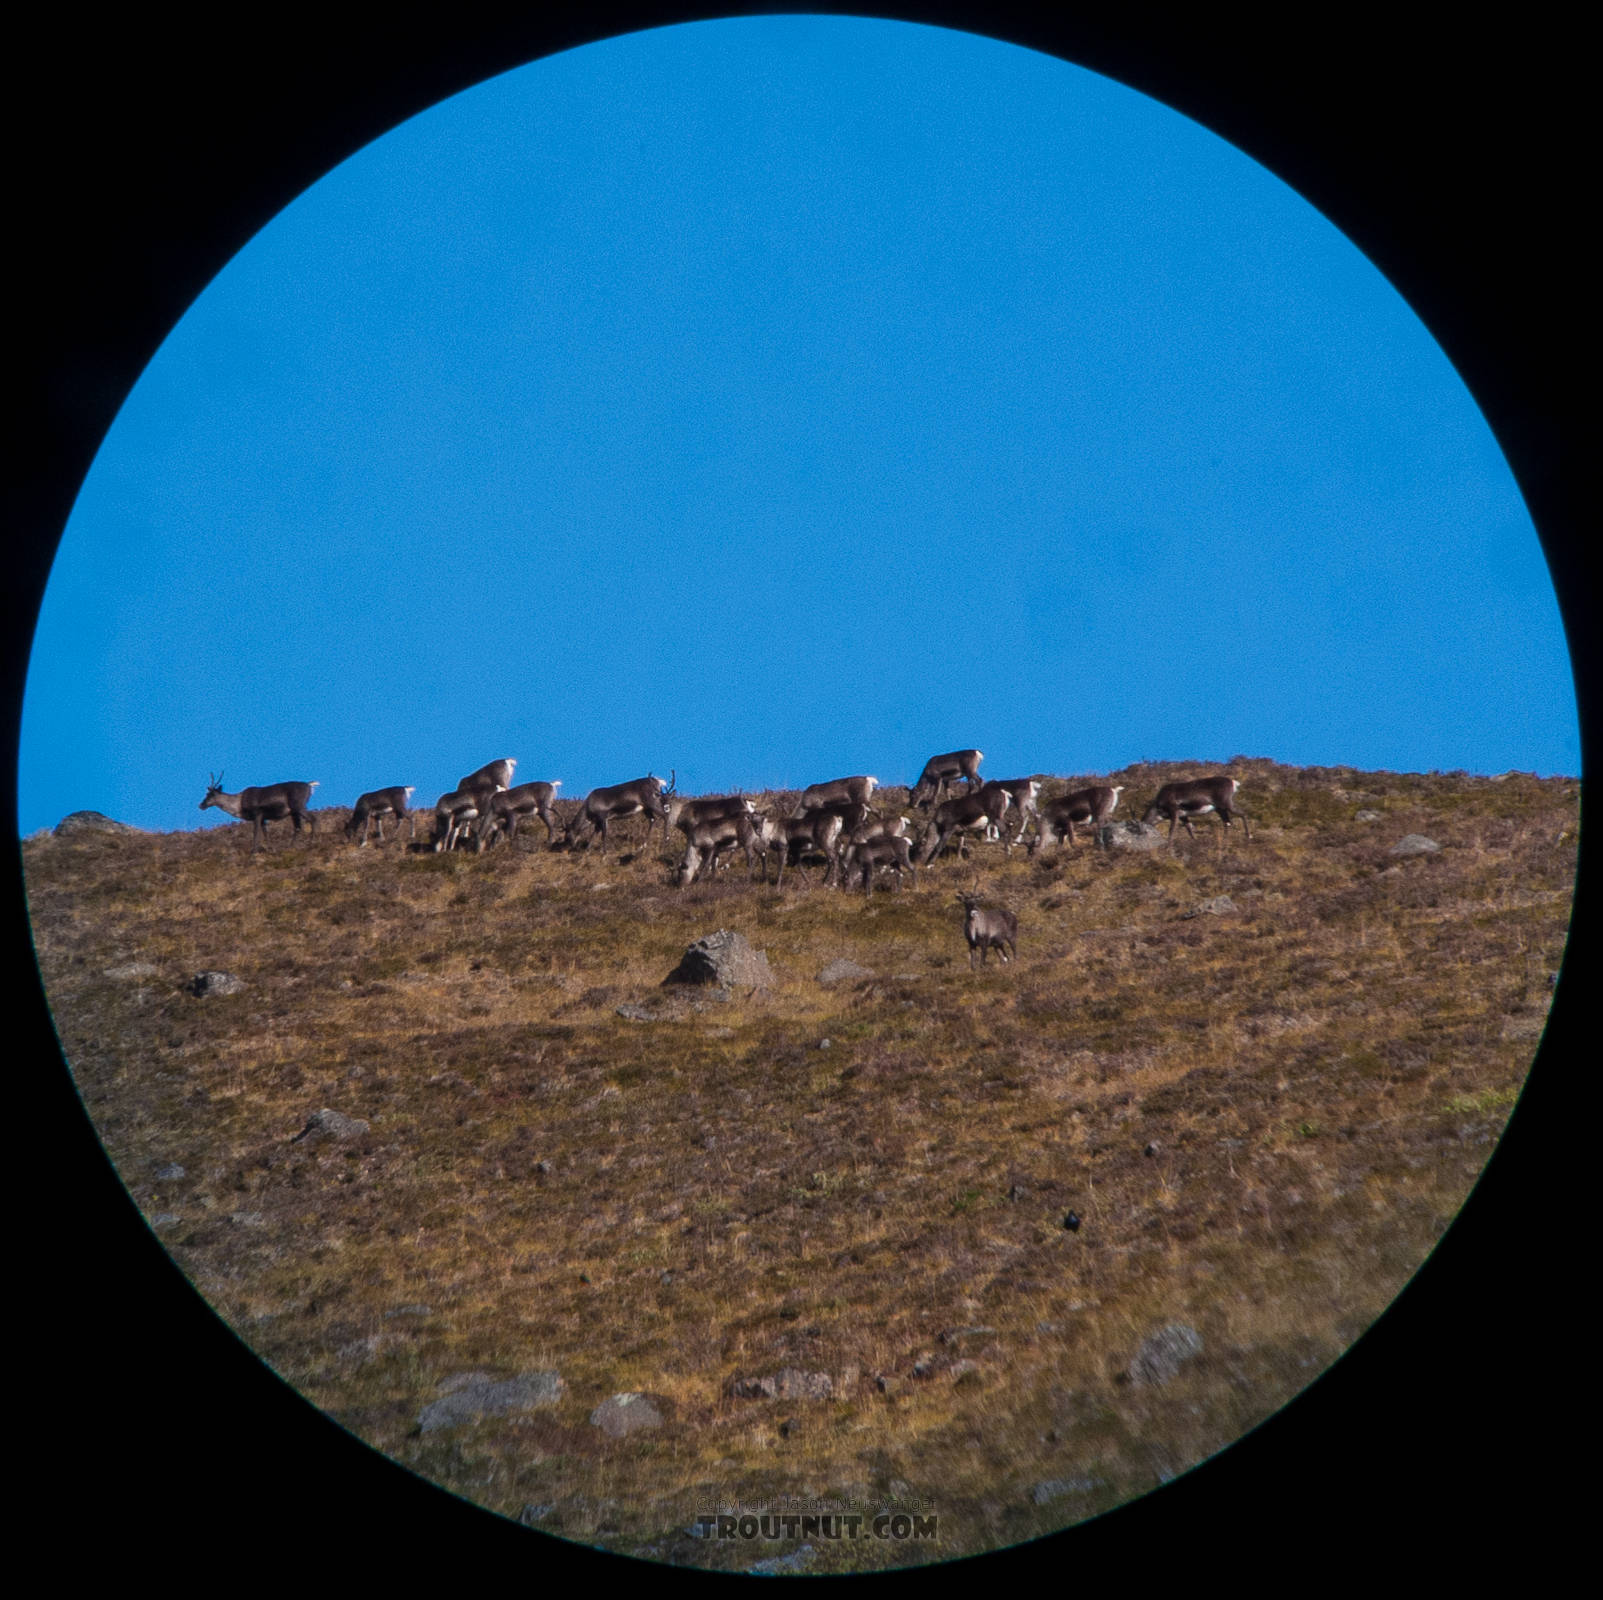 Here, the herd's approach was reenacted the next day by another herd in the same location, and I had the camera and spotting scope ready.